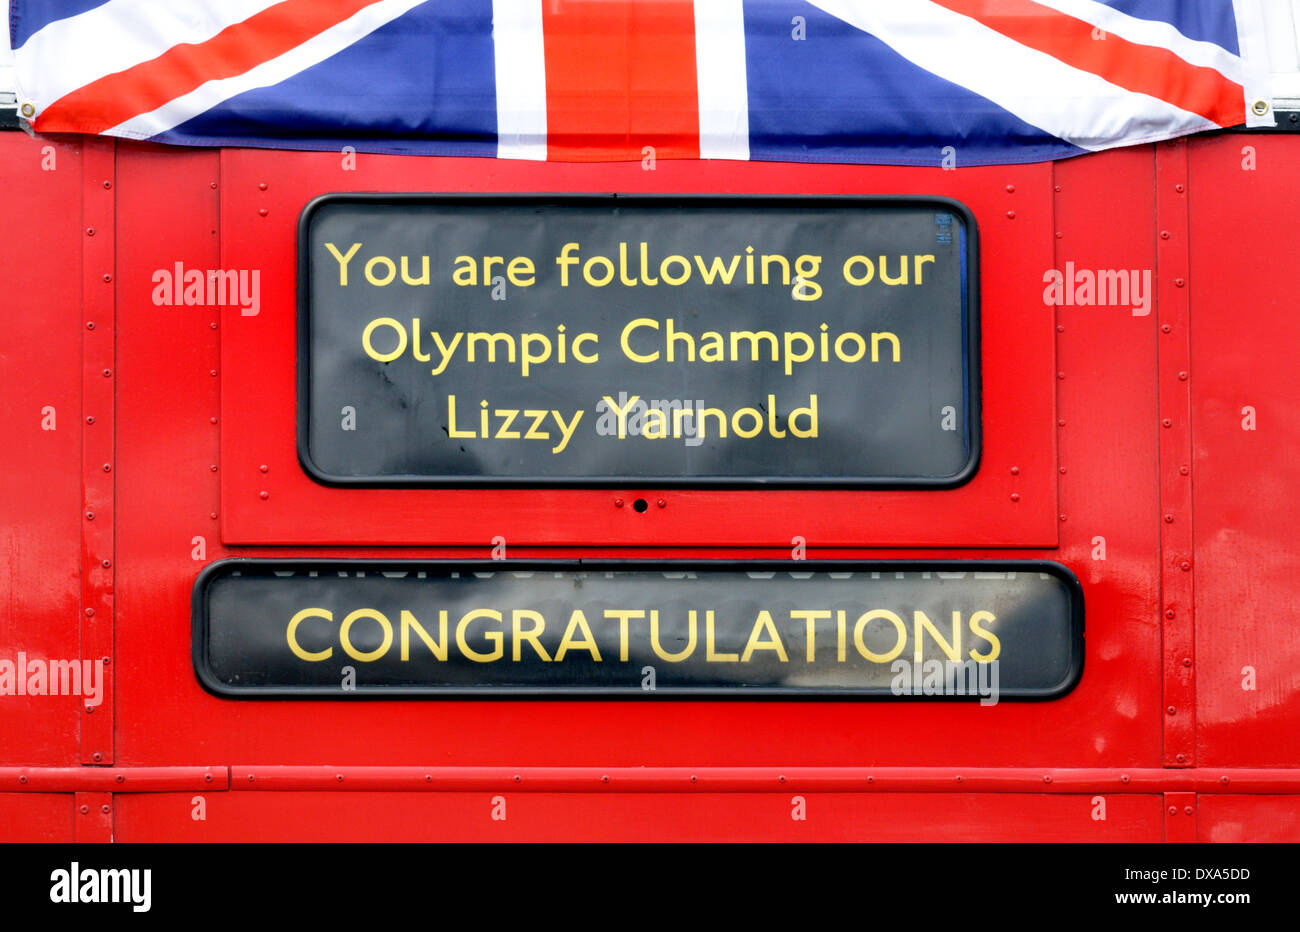 Lizzy Yarnold Victory Parade in Sevenoaks, Kent. 21/03/2014. Winter Olympic gold medal winner Lizzy Yarnold driven from Sevenoaks to her home village of West Kingsdown in Kent in an open-top bus. Open top bus with special message Stock Photo